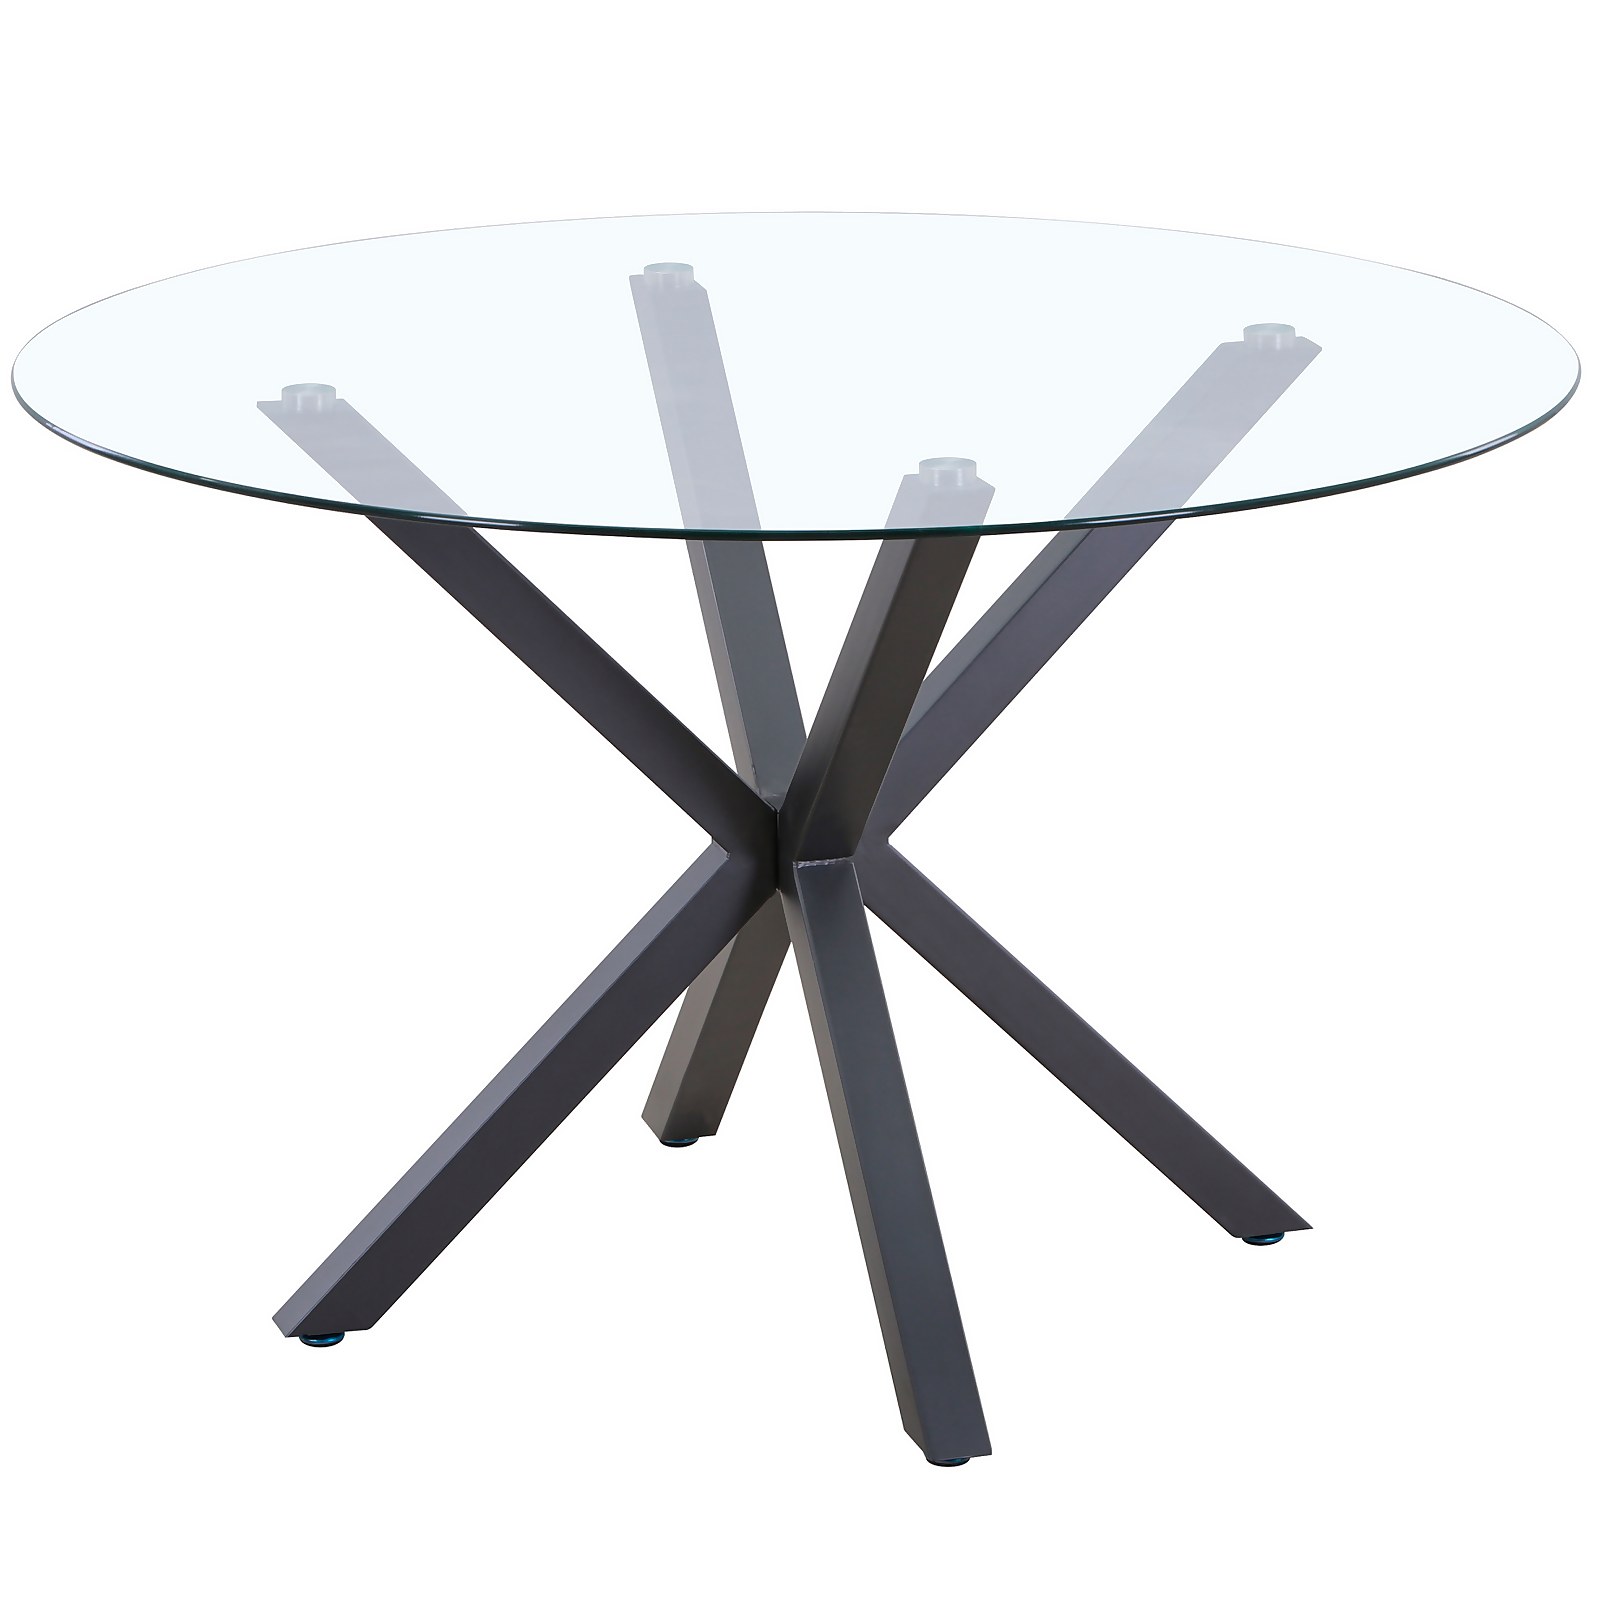 Ludlow Round Glass Dining Table - Black